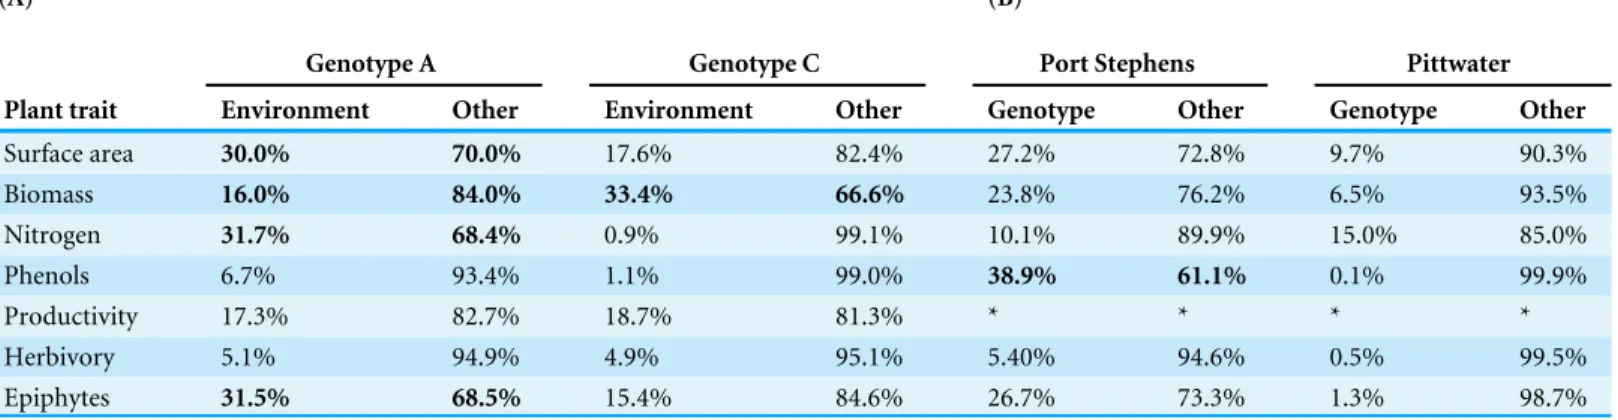 Table 2 Percentage of variation attributable to environment and genotype. The percentage of variation attributable to environment (meadow) and genotype for (A) the genotypes (A and C) that were shared between locations, and (B) for the two locations in whi